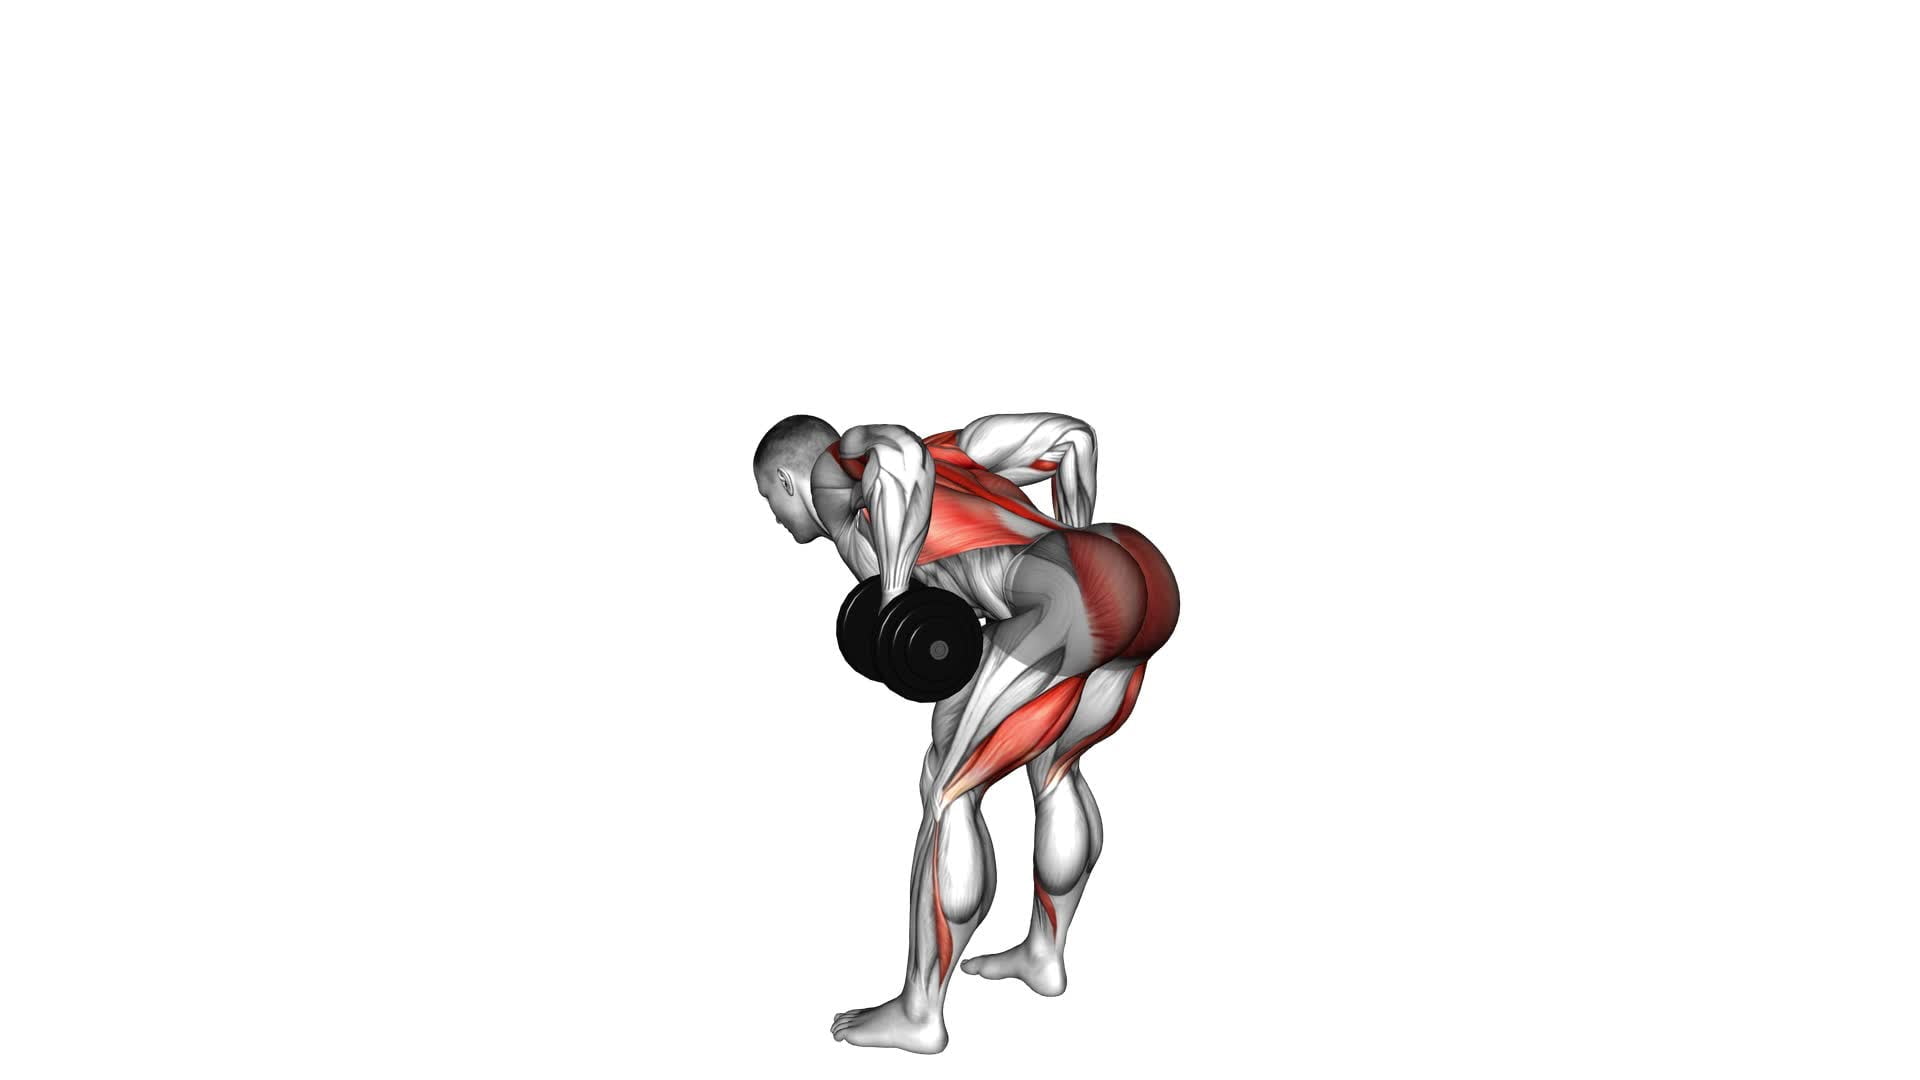 Dumbbell Romanian Deadlift to Bent Over Row - Video Exercise Guide & Tips